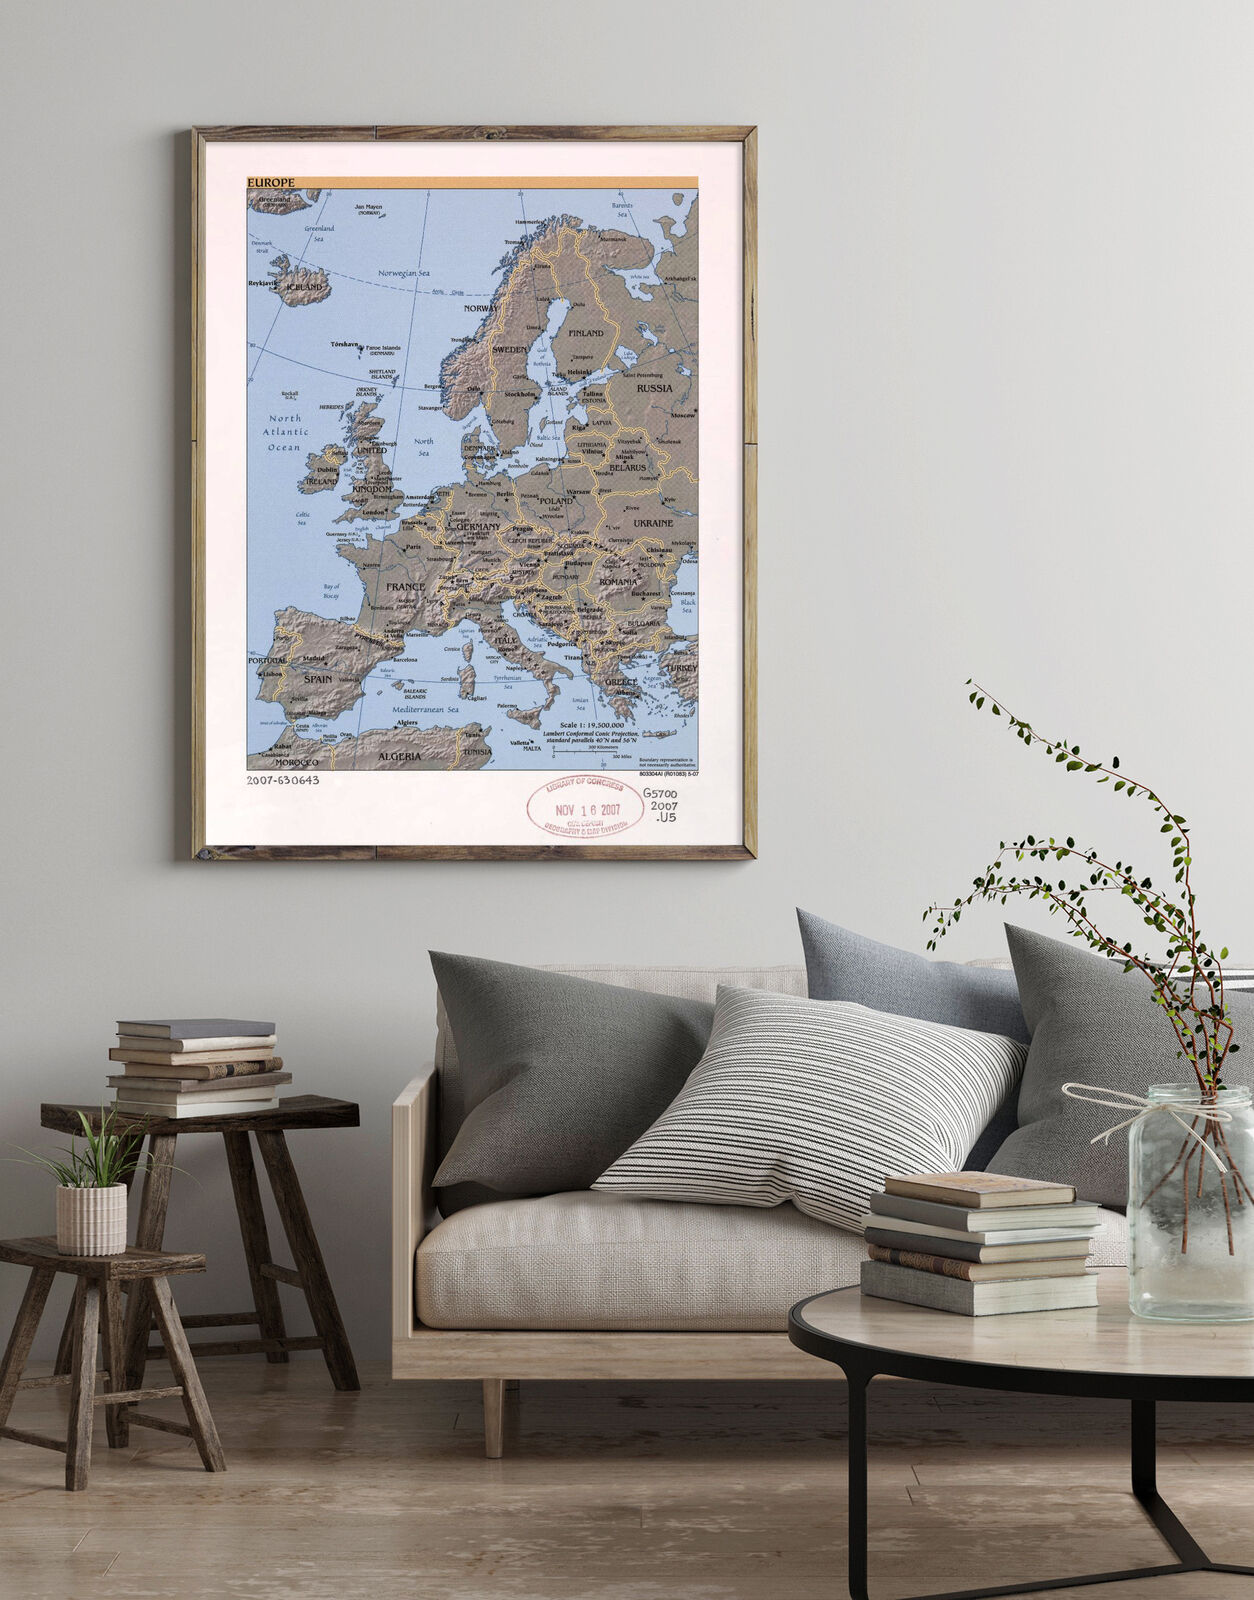 2007 Map| Europe| Europe Map Size: 18 inches x 24 inches |Fits 18x24 size frame